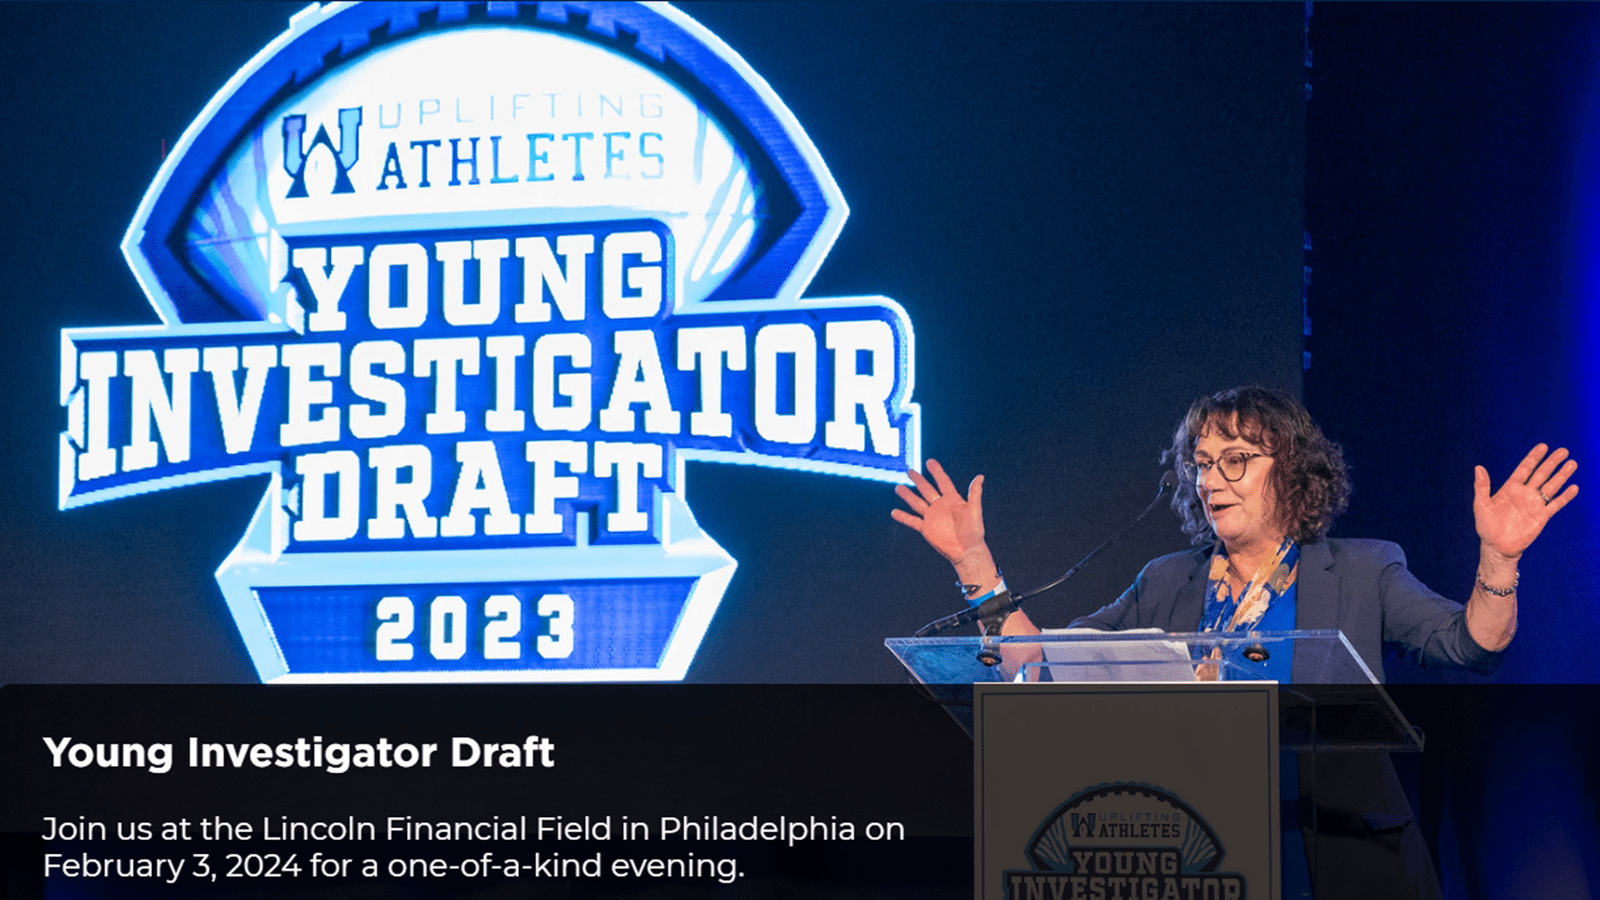 Debbie Drane, Senior Vice President for Global Commercial Development and Therapy Area Strategy, celebrates winners of research grants at an Uplifting Athletes Young Investigator Draft.